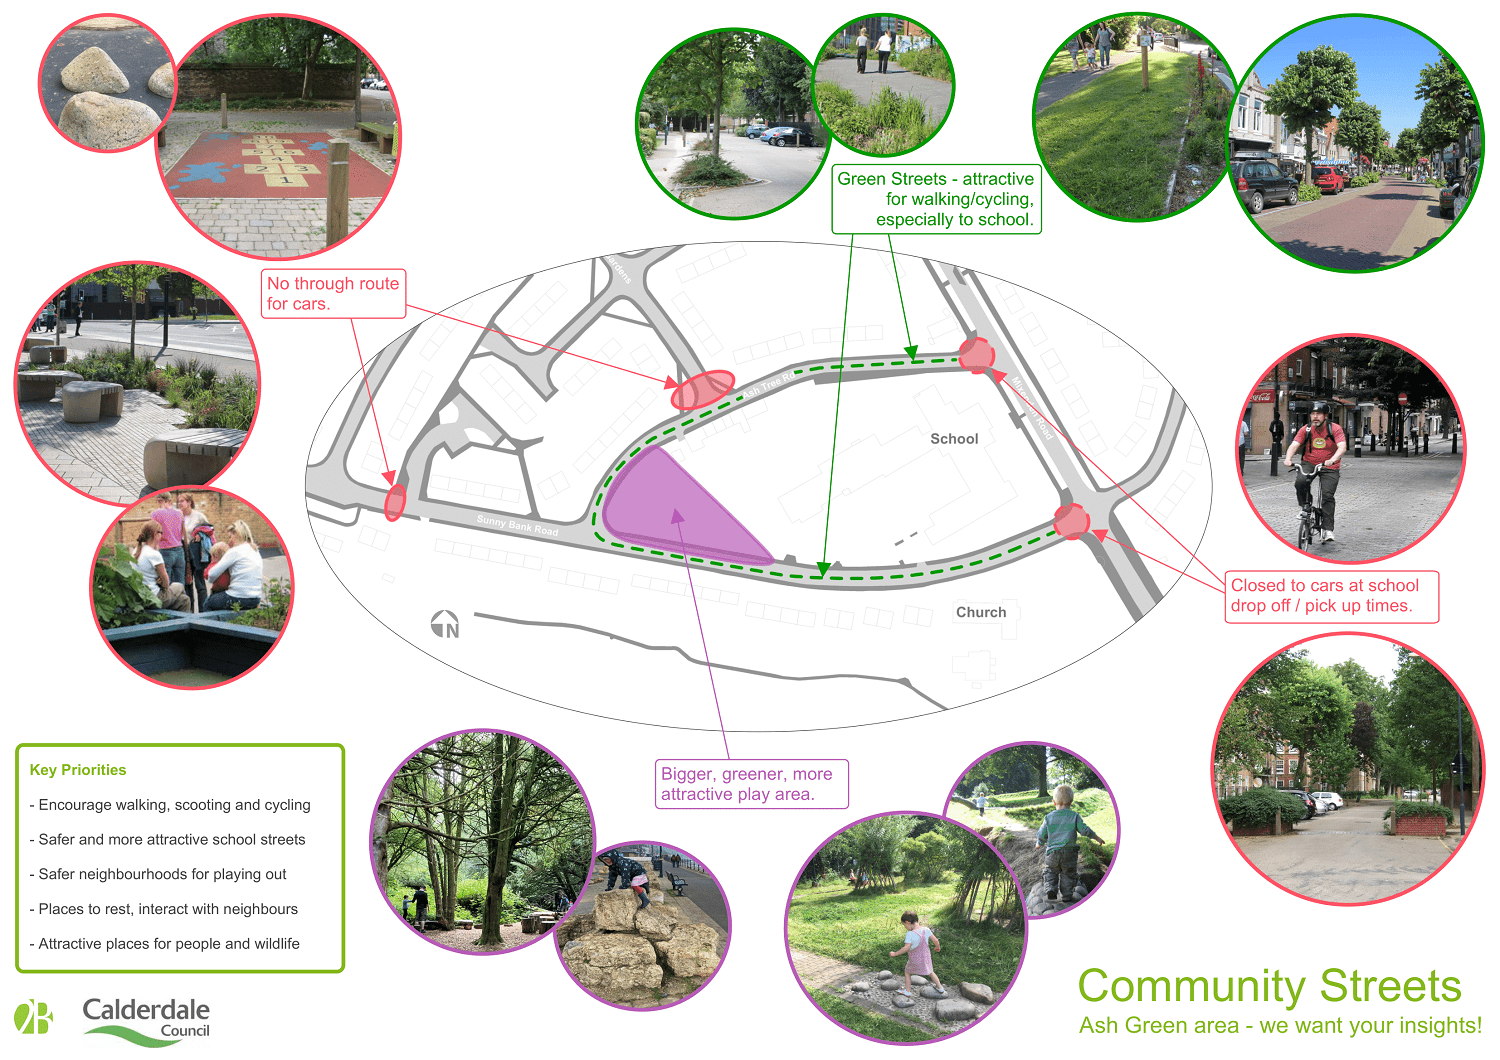 Image with overview of proposals in locations around Ash Green including no through routes for cars, green streets, and attractive play areas. Plan is surrounded by examples from other developments.